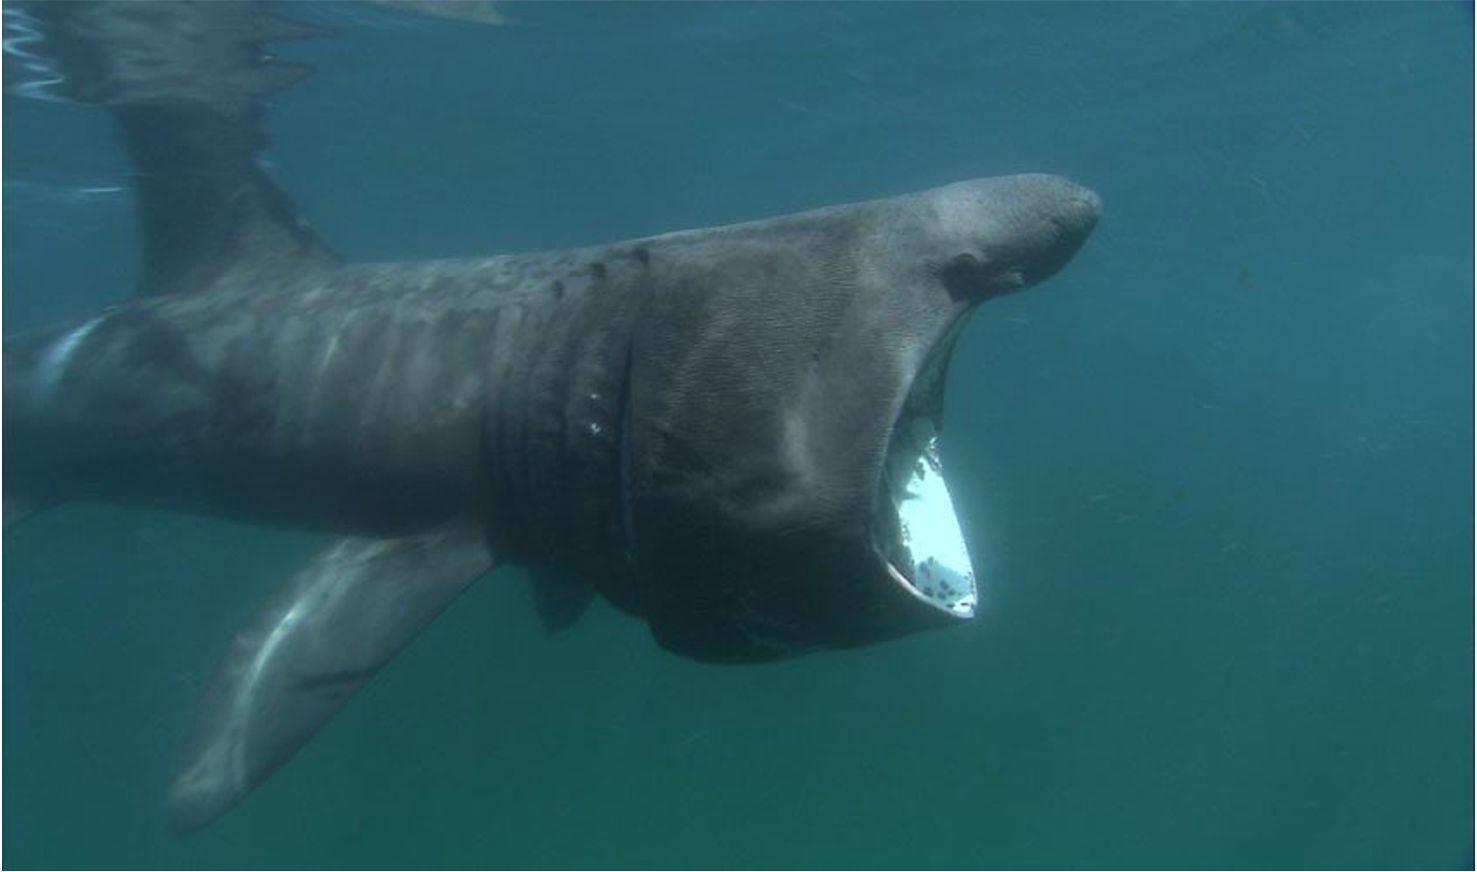 A basking shark in water.